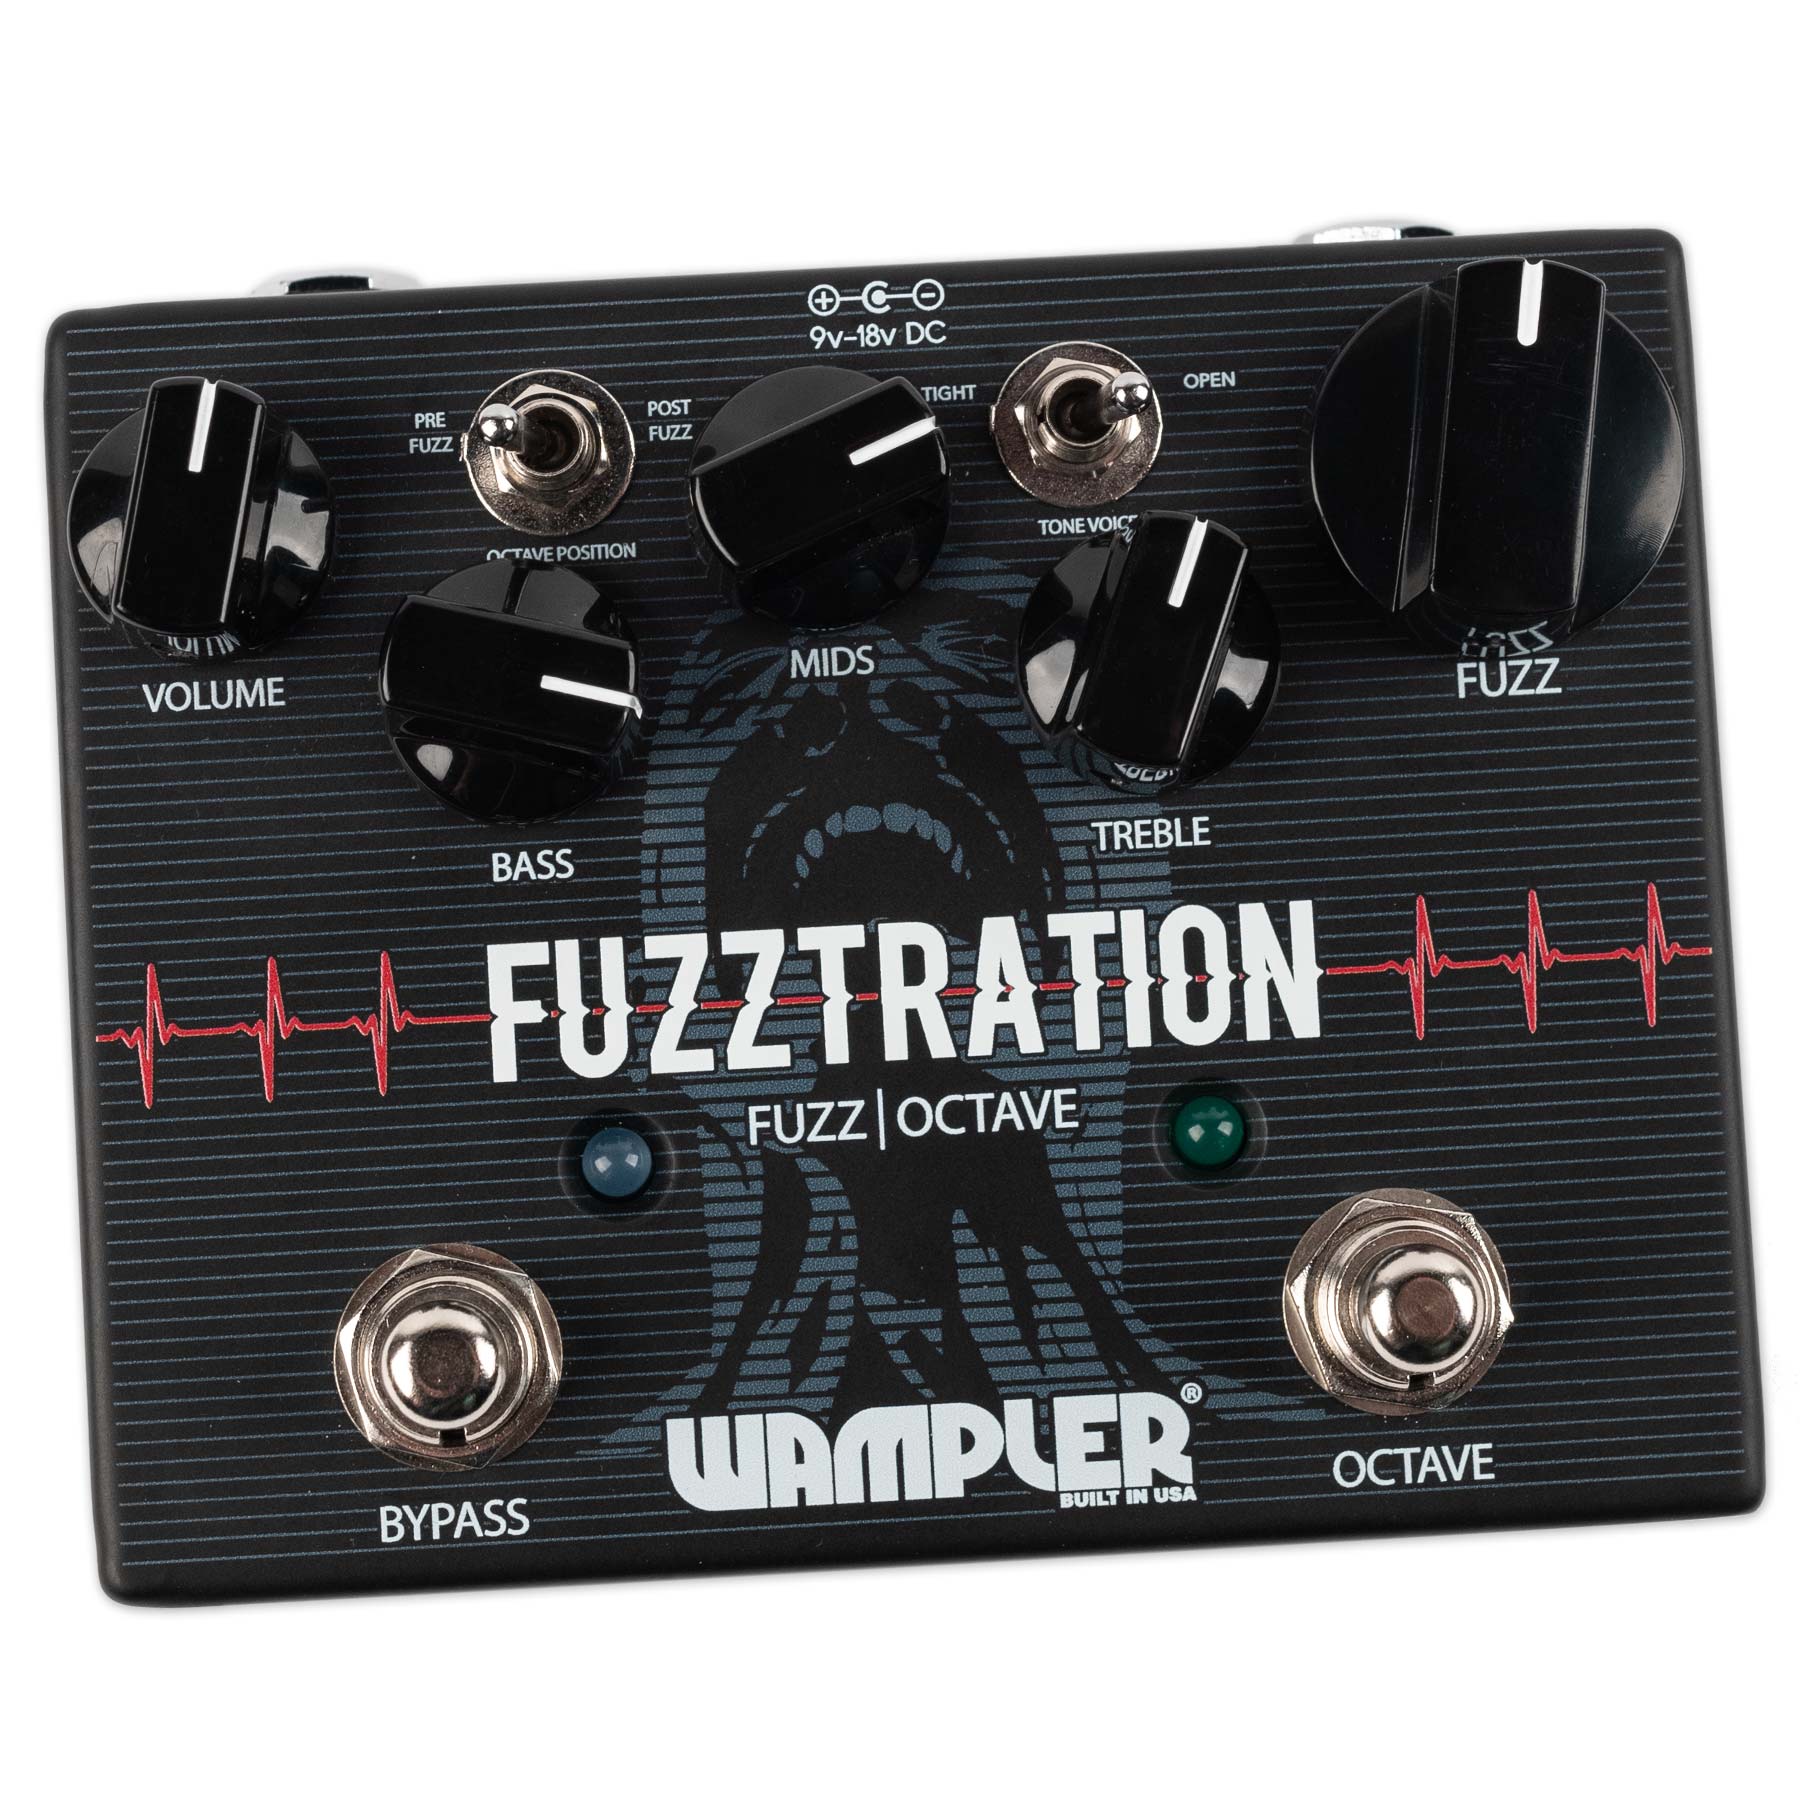 WAMPLER FUZZTRATION FUZZ WITH OCTAVE PEDAL